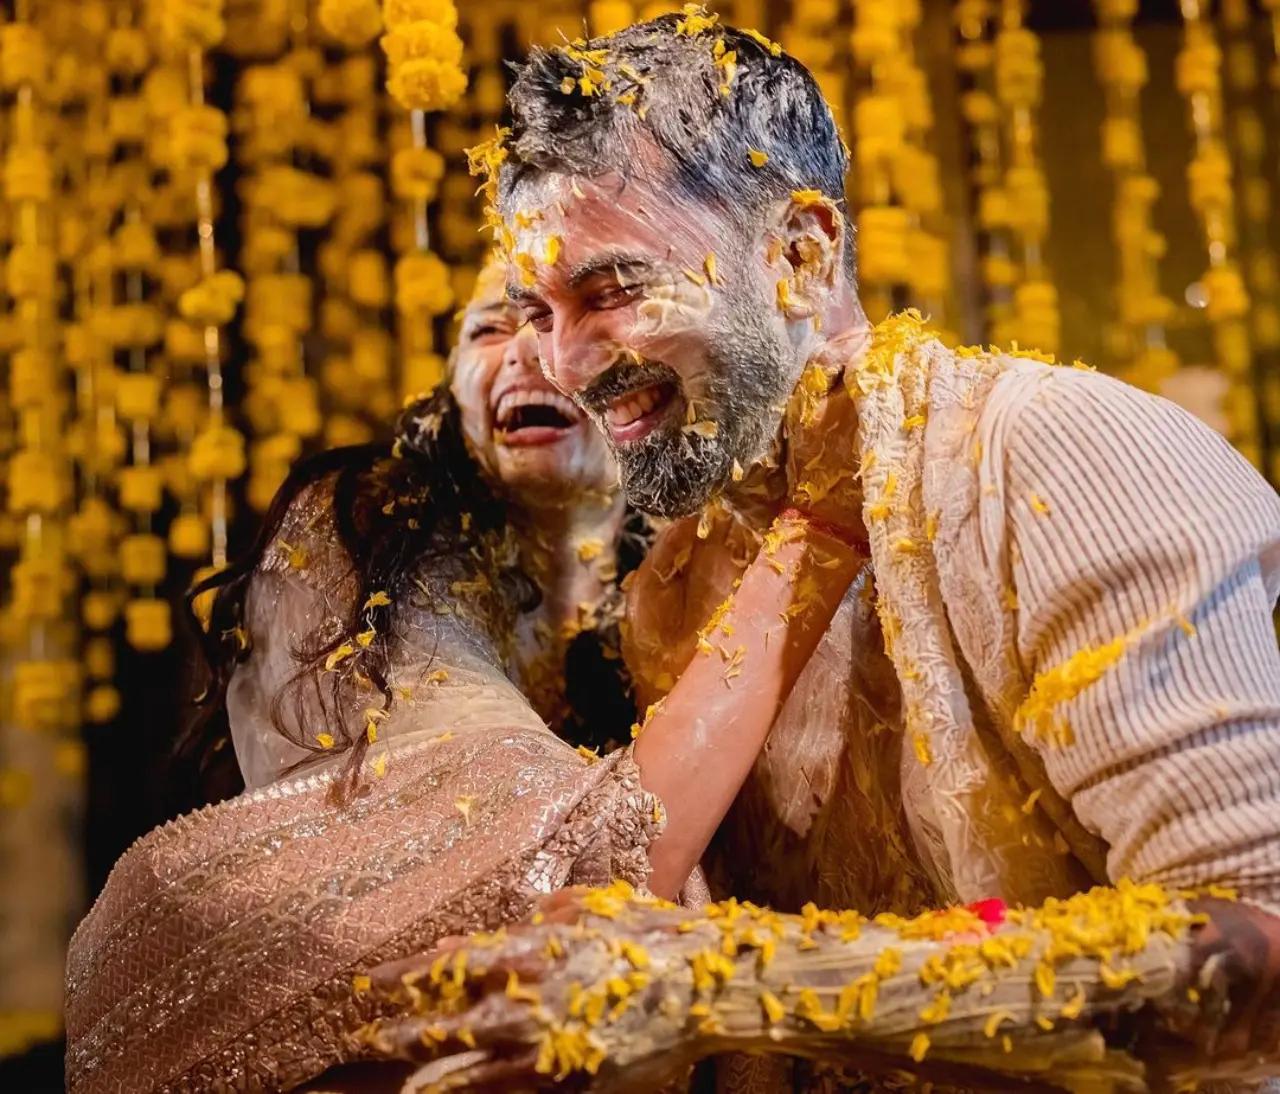 After her wedding with the cricketer, Athiya shared pictures from their pre-wedding festivities on her Instagram. She gave glimpses into the haldi ceremony, which took place before the wedding